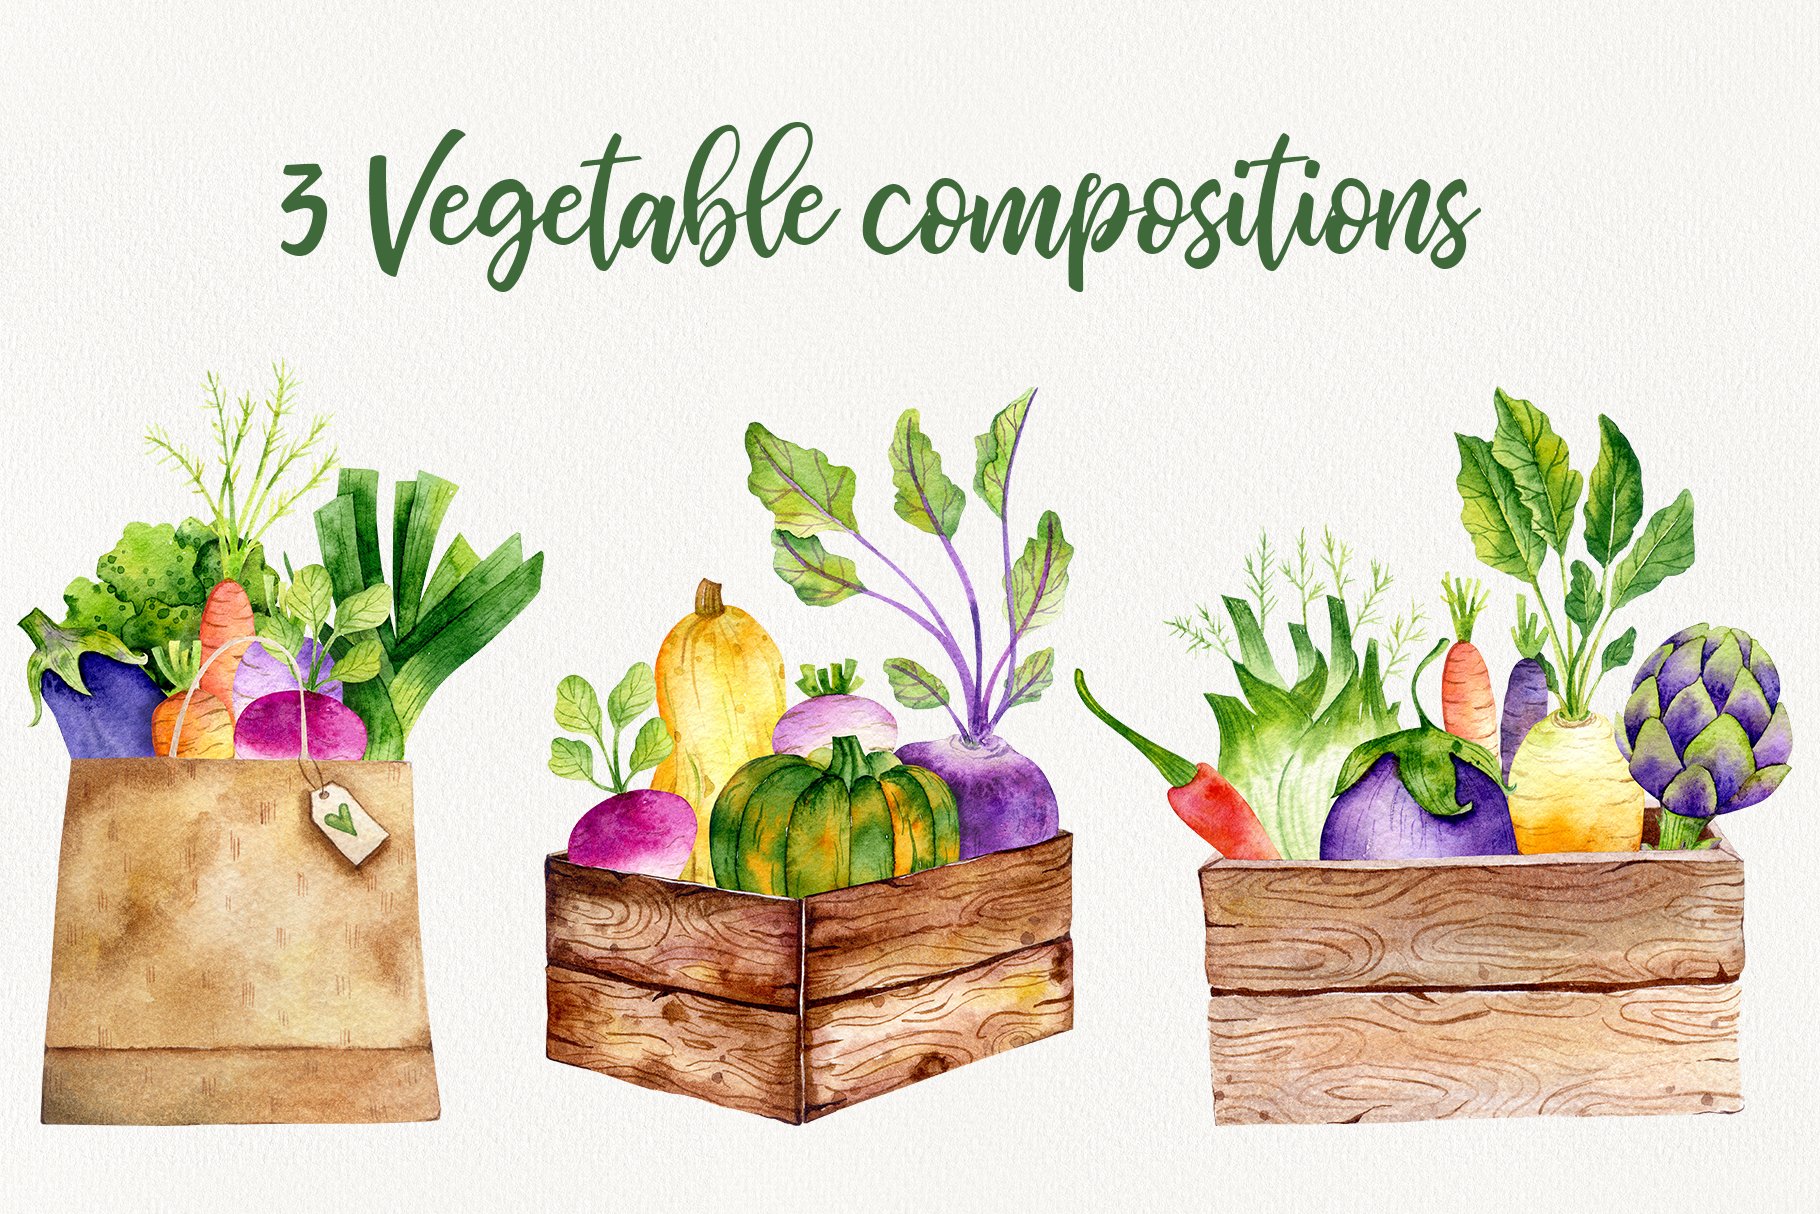 Beautiful vegetables are depicted in boxes.